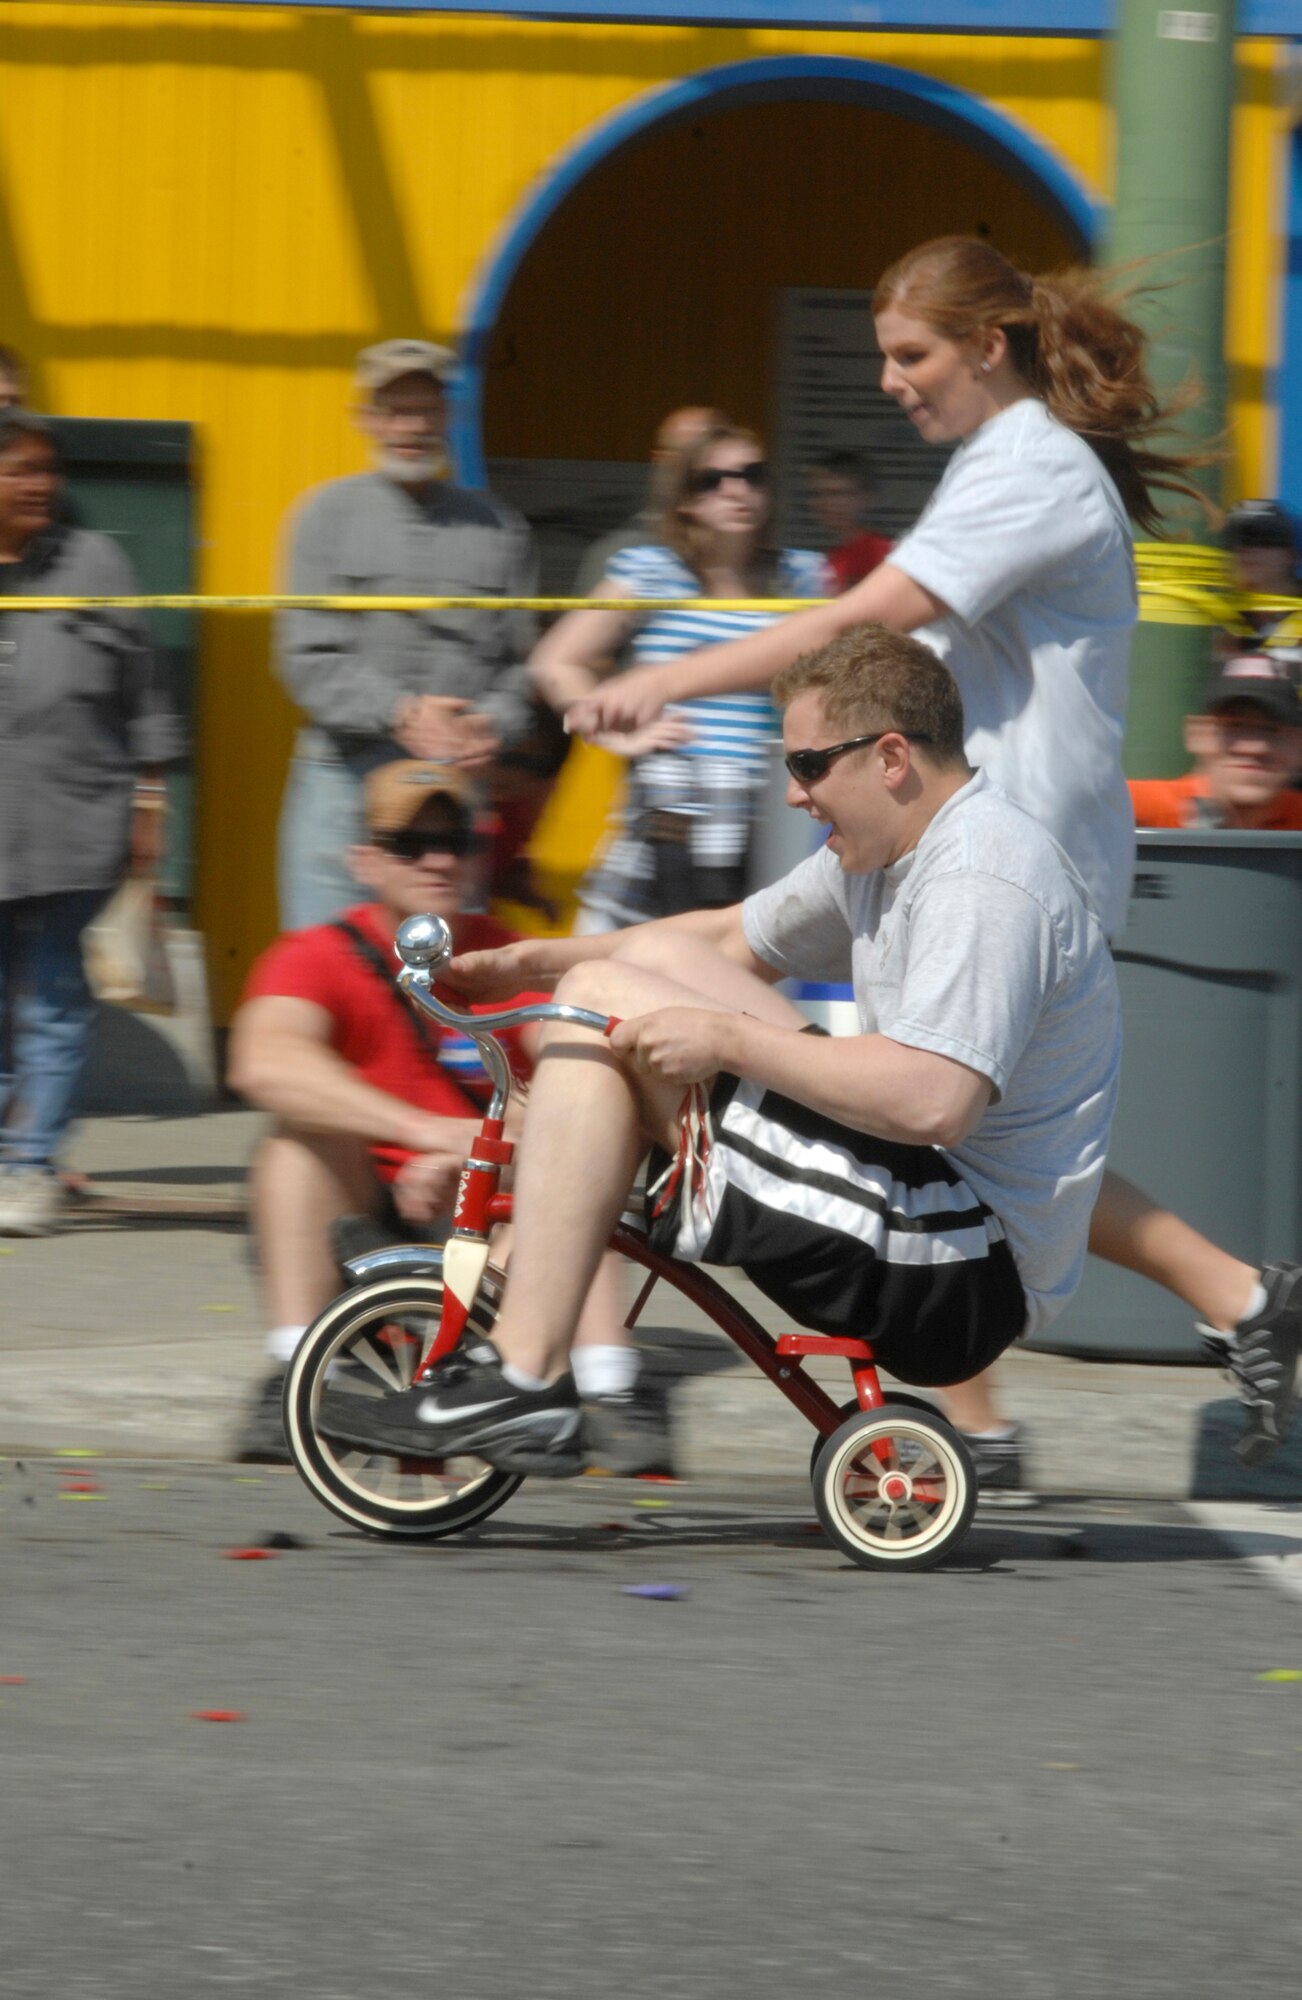 ANCHORAGE, Alaska -- Senior Airman Ryan Blanton rides a tricycle to the finish line during the 2009 Hero Games June 27. Hero Games brought military and civilian teams together in a friendly competition of various games such as water balloon volleyball, tug o' war and litter carry. Blanton is a member of the 703rd Aircraft Maintenance Squadron. (U.S. Air Force photo/Senior Airman David Carbajal)